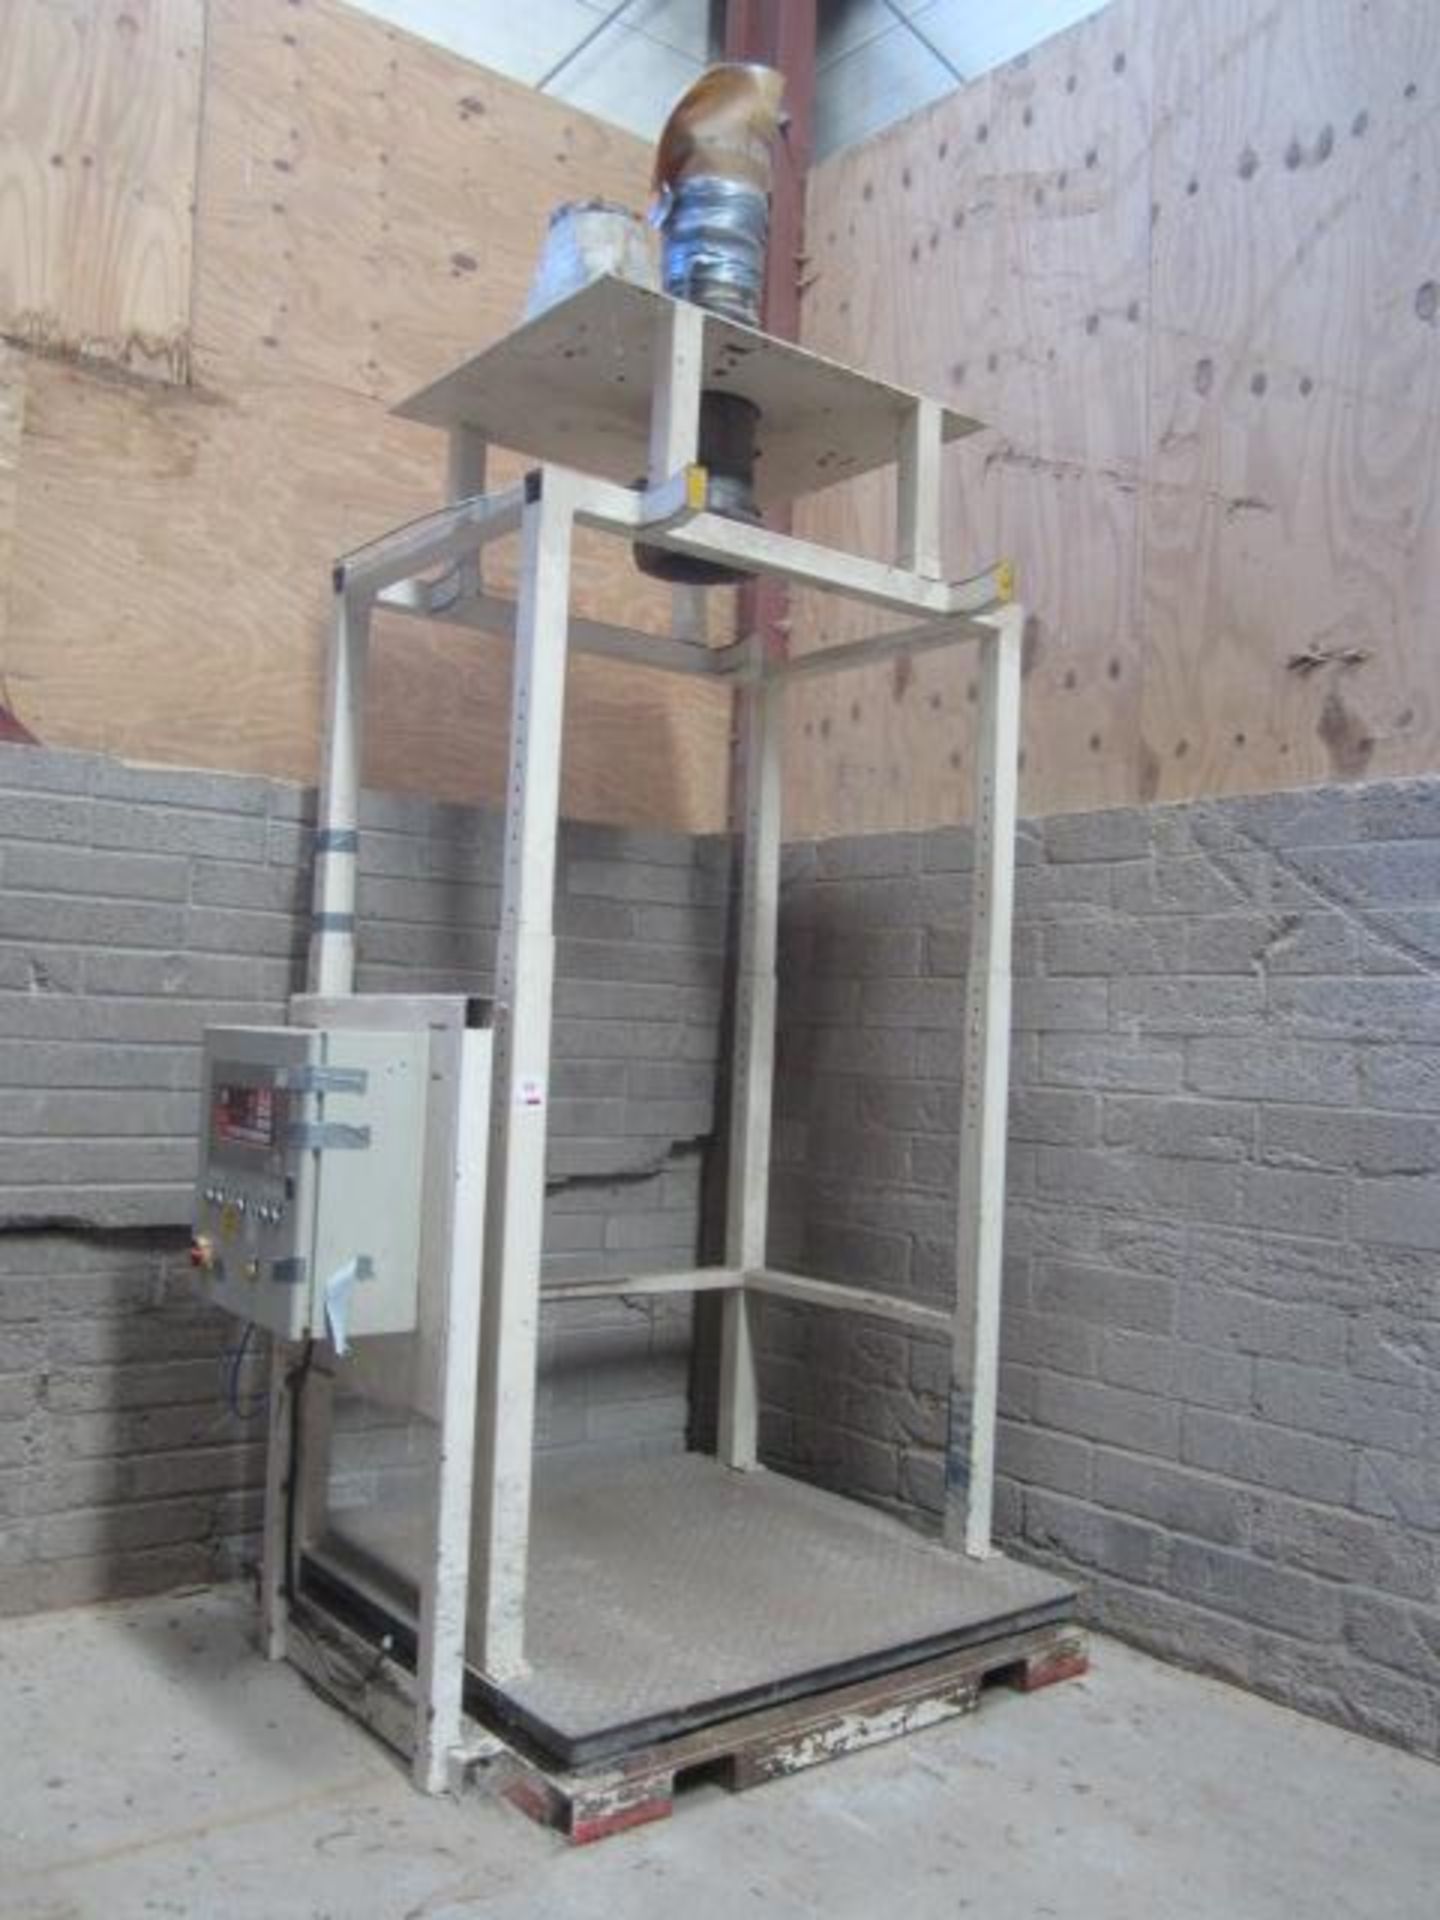 HK Process Measurement steel framed silo feed weigh scale with digital control, model System 2X, - Image 2 of 4